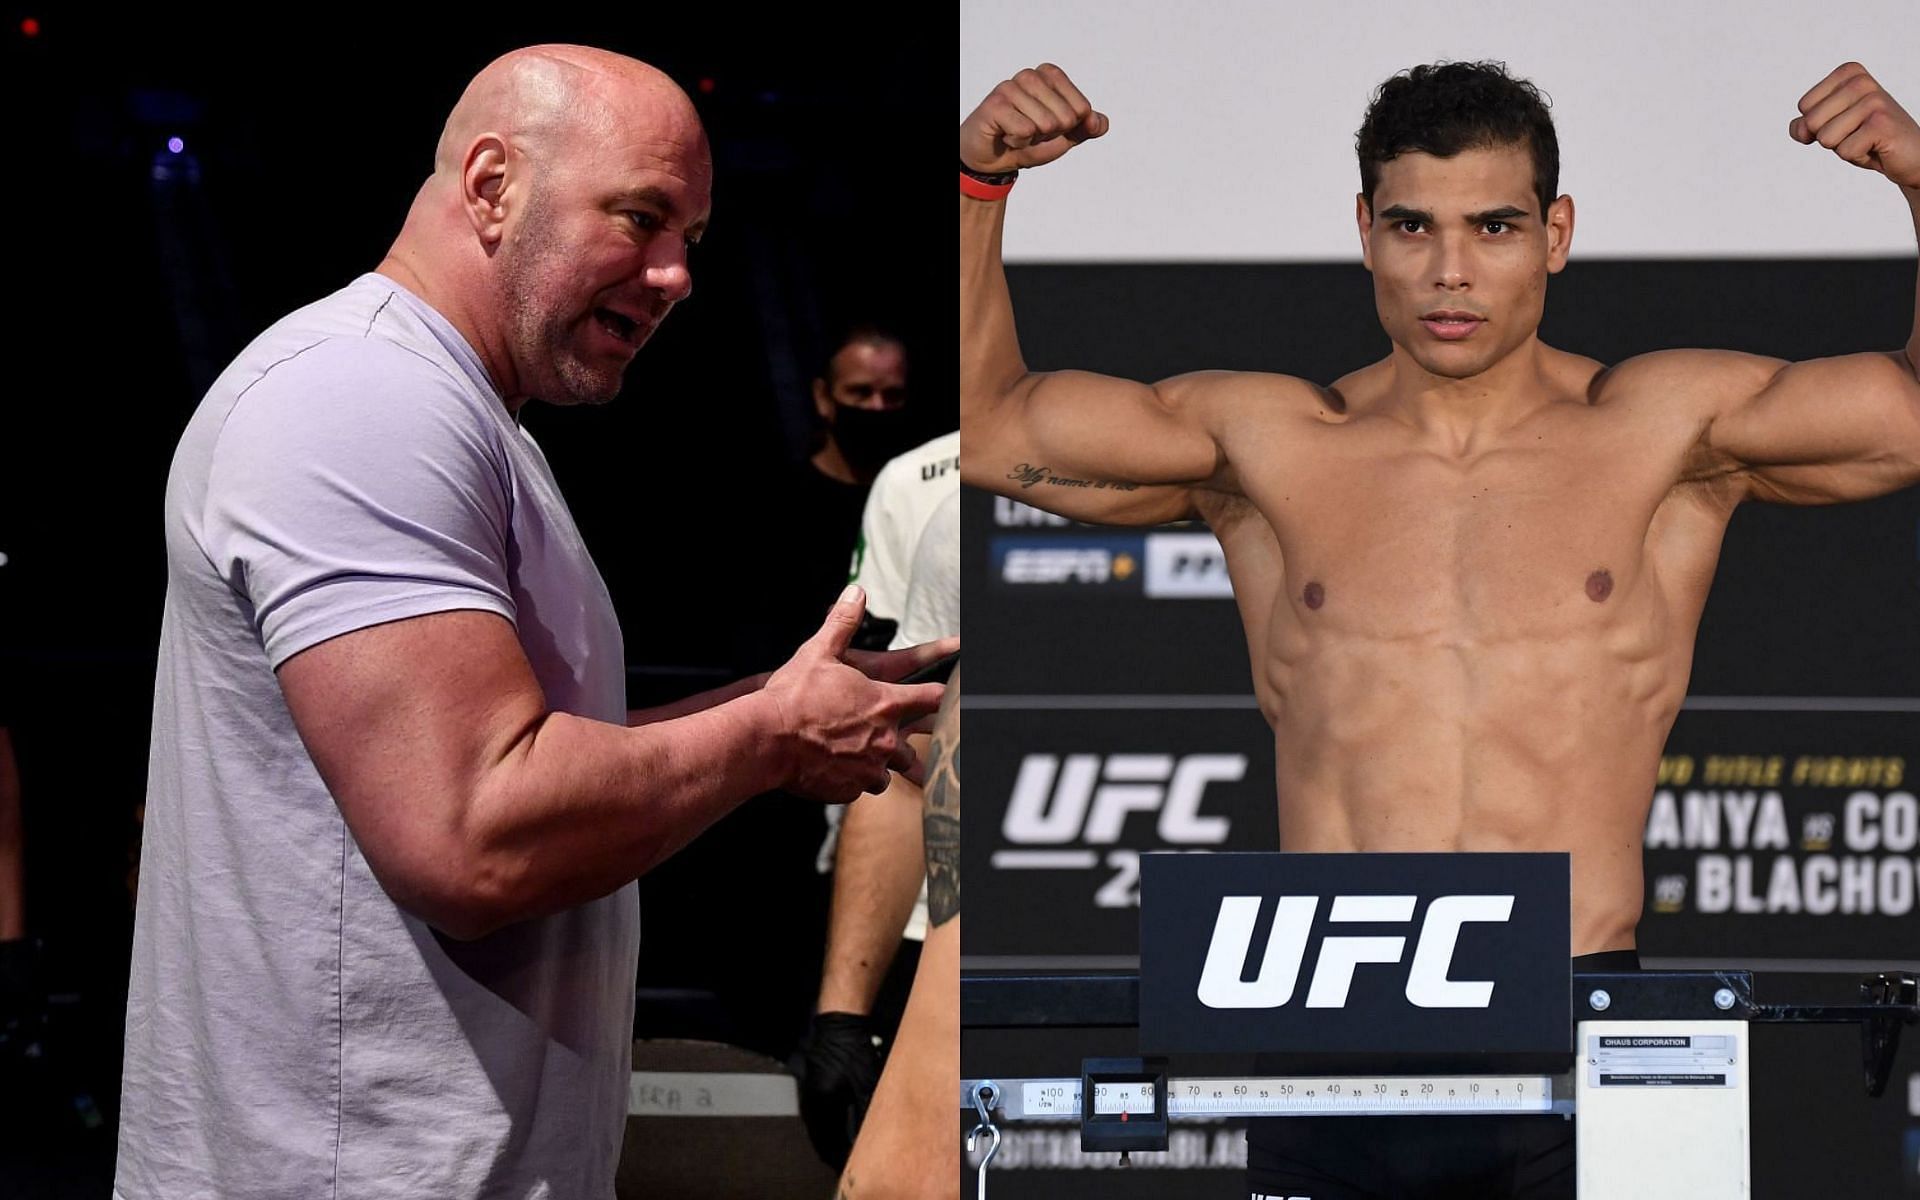 Dana White has confirmed that he wants to see Paulo Costa stay at light heavyweight for the foreseeable future